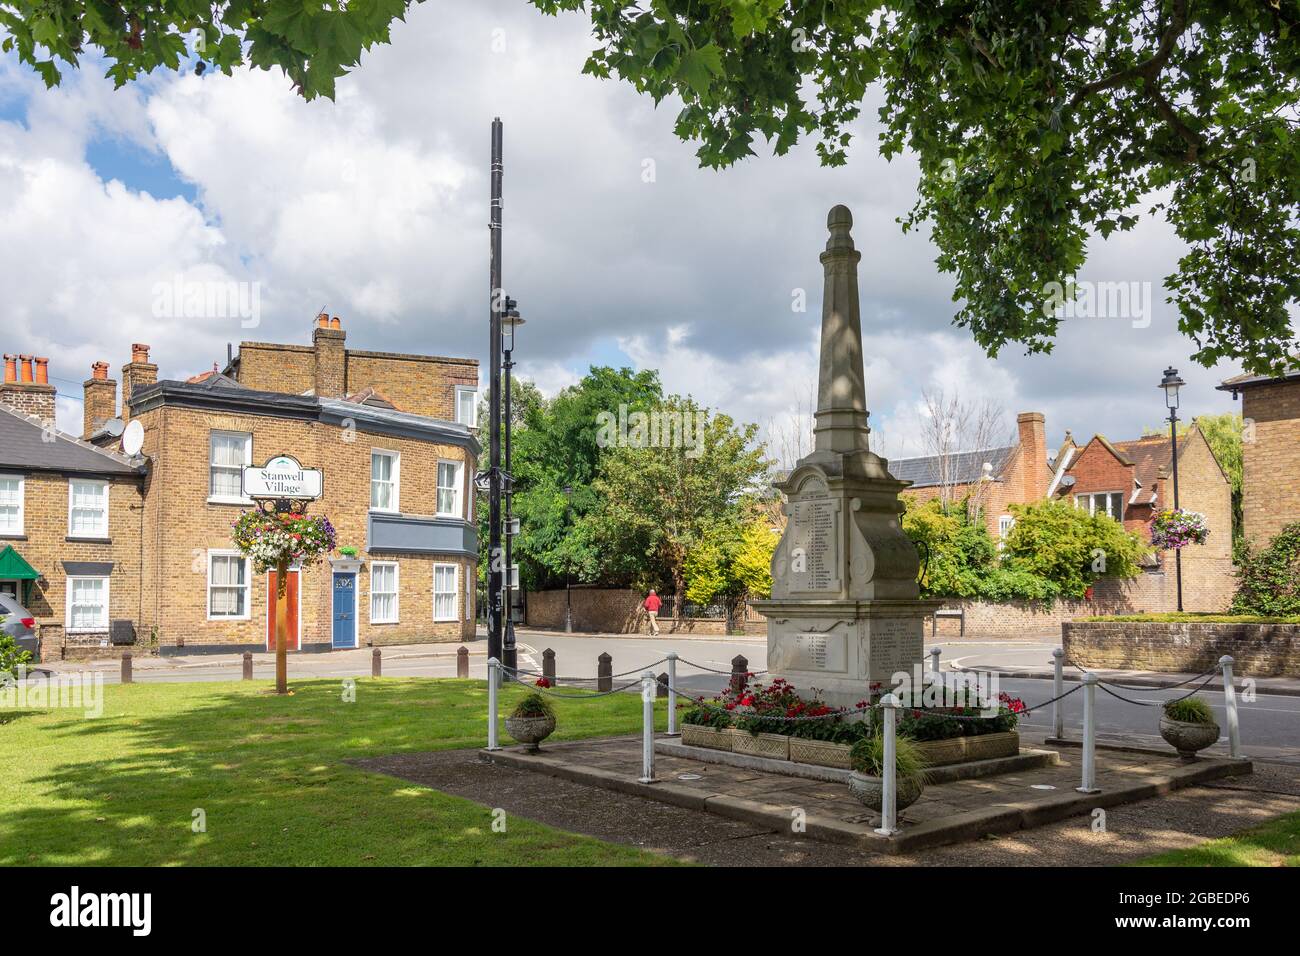 High Street, Stanwell Village, Stanwell, Surrey, England, Regno Unito Foto Stock